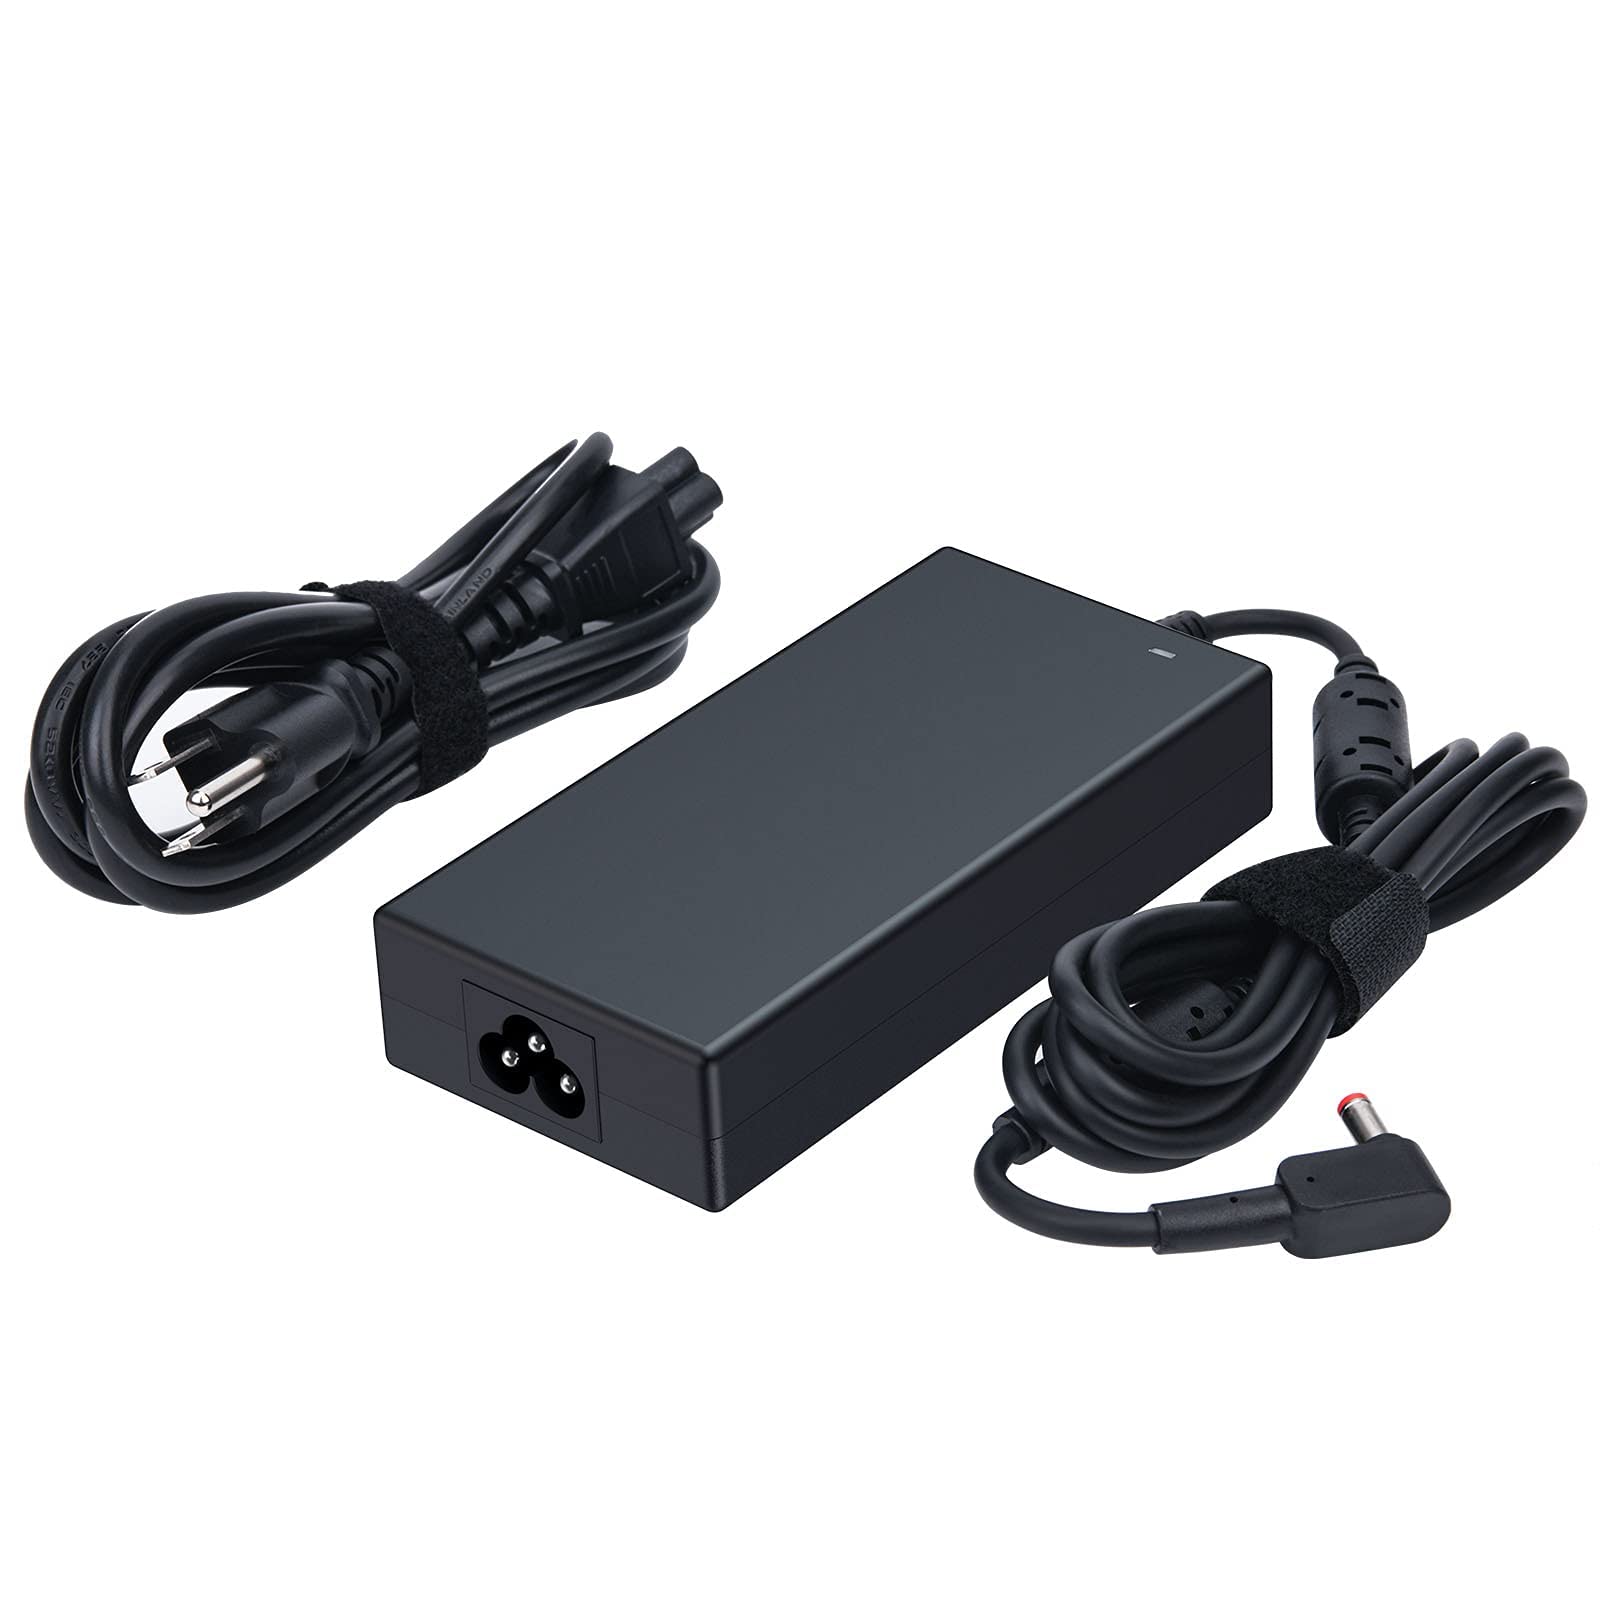 180W AC Charger for Acer Predator Helios 300 Gaming Laptop PH315-51 PH315-51-78NP G3-571-77QK G3-571 G3-572 PH315-52 PH317-51 PH317-52 ADP-180MB K Predator Triton 300 SE Power Adapter Supply Cord